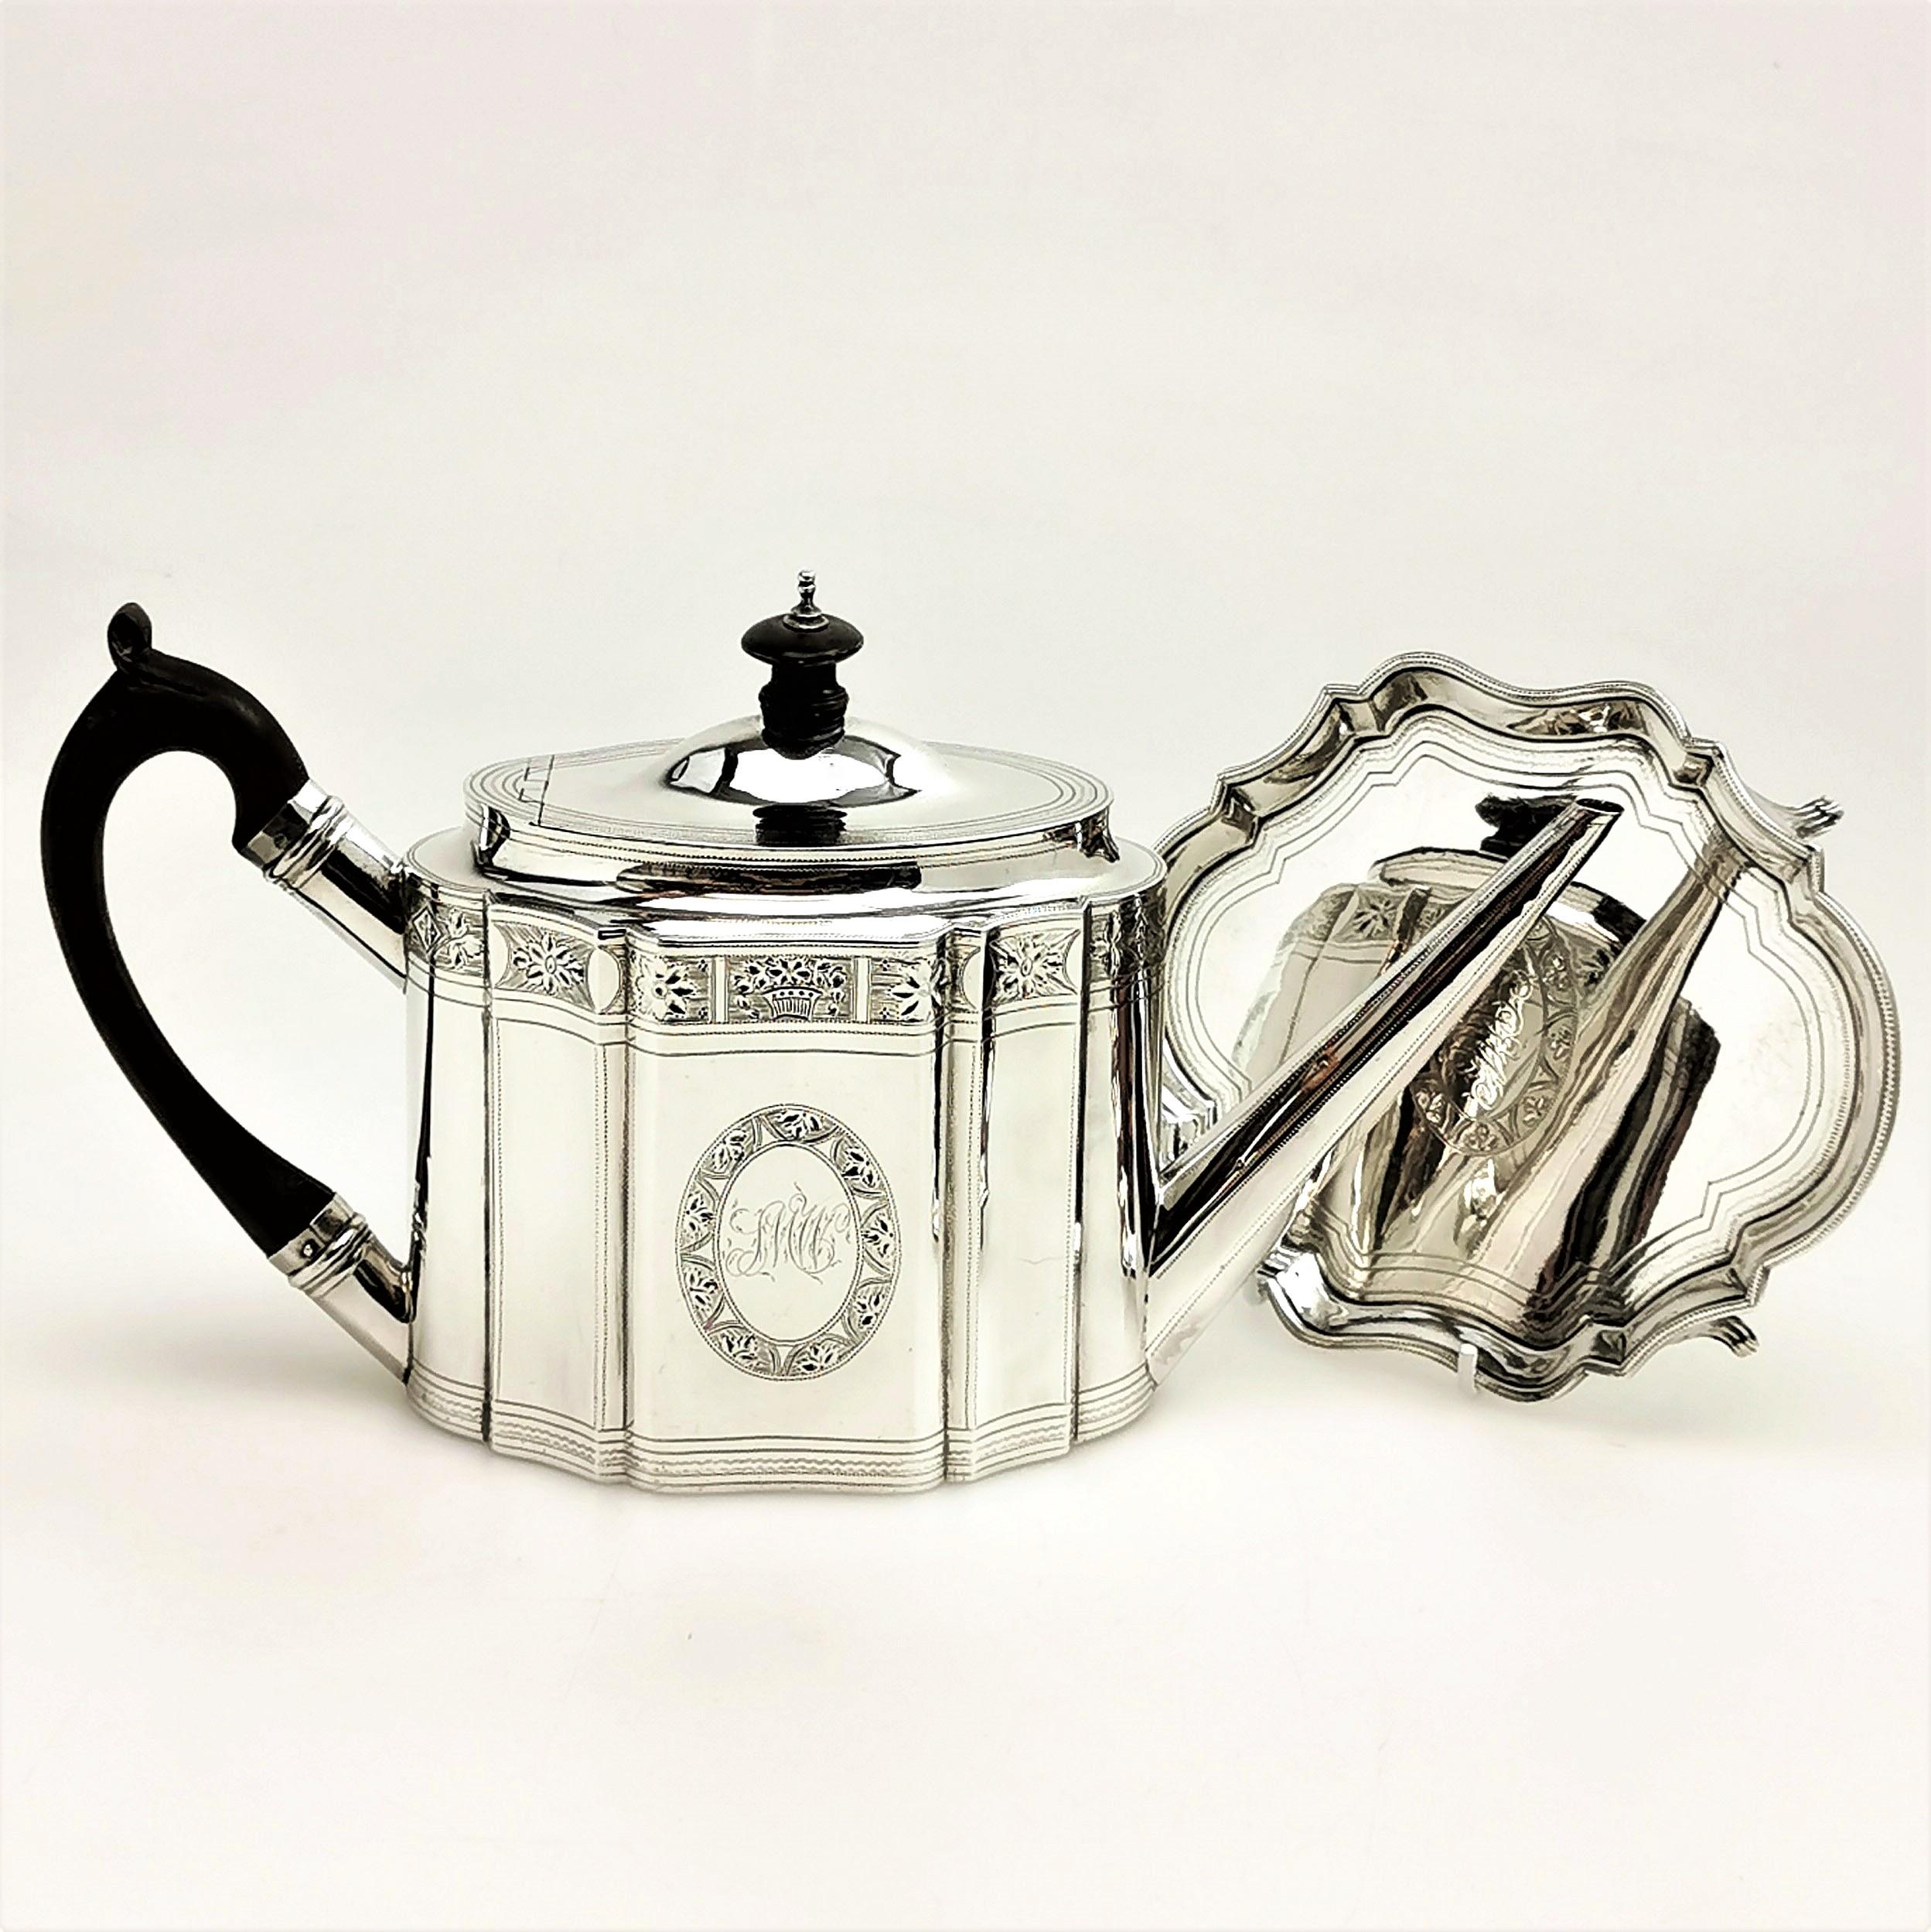 A lovely Antique Georgian Silver Teapot on Stand. The shaped Teapot stands on a matching shaped tray, each embellished with delicate bright cut engraving. Both Teapot and Stand have an engraved monogram in an oval cartouche, while the Teapot has a